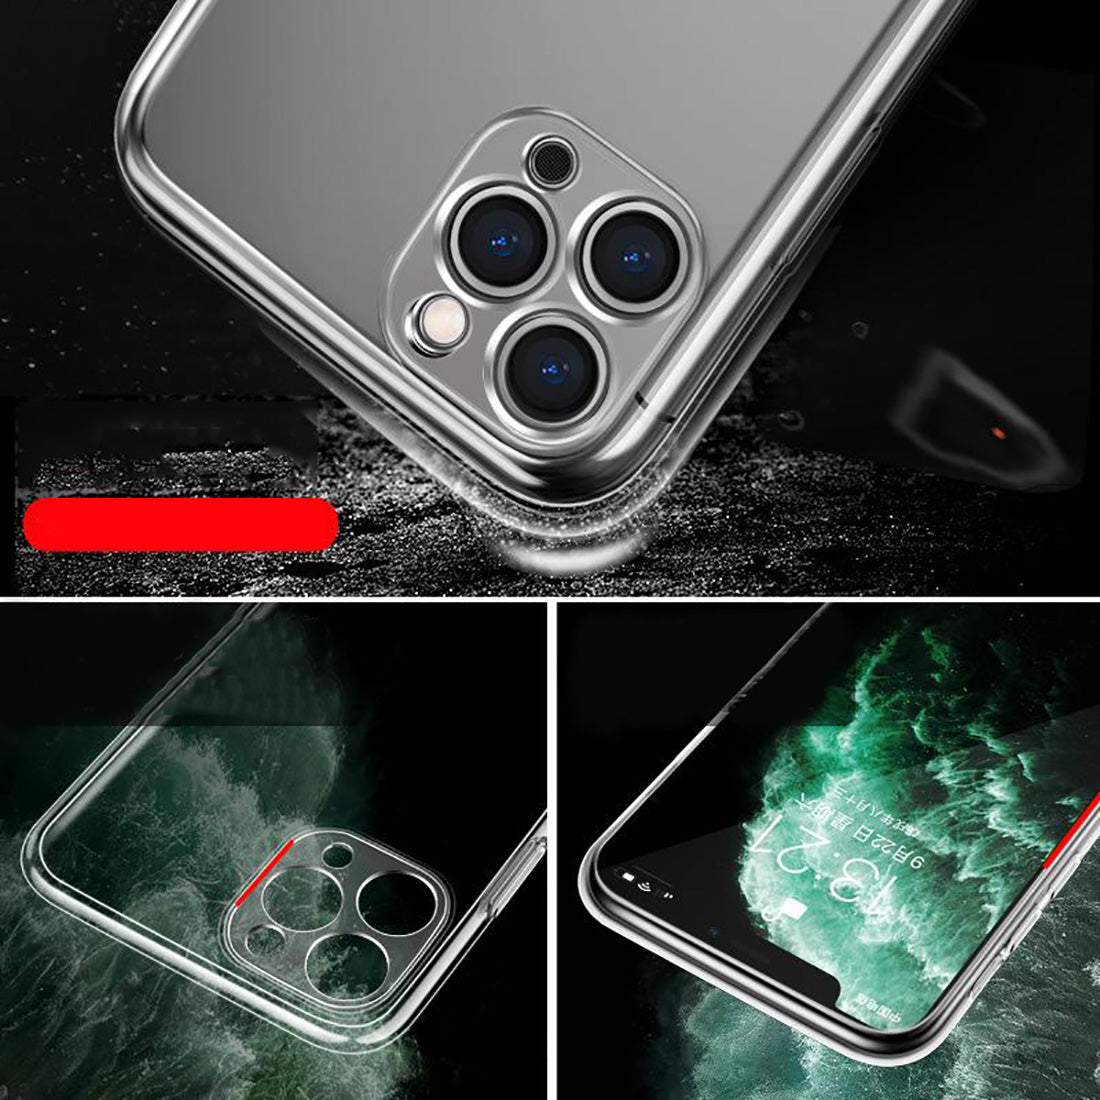 Super Clear Camera Protection Back Cover for Apple iPhone 11 Pro